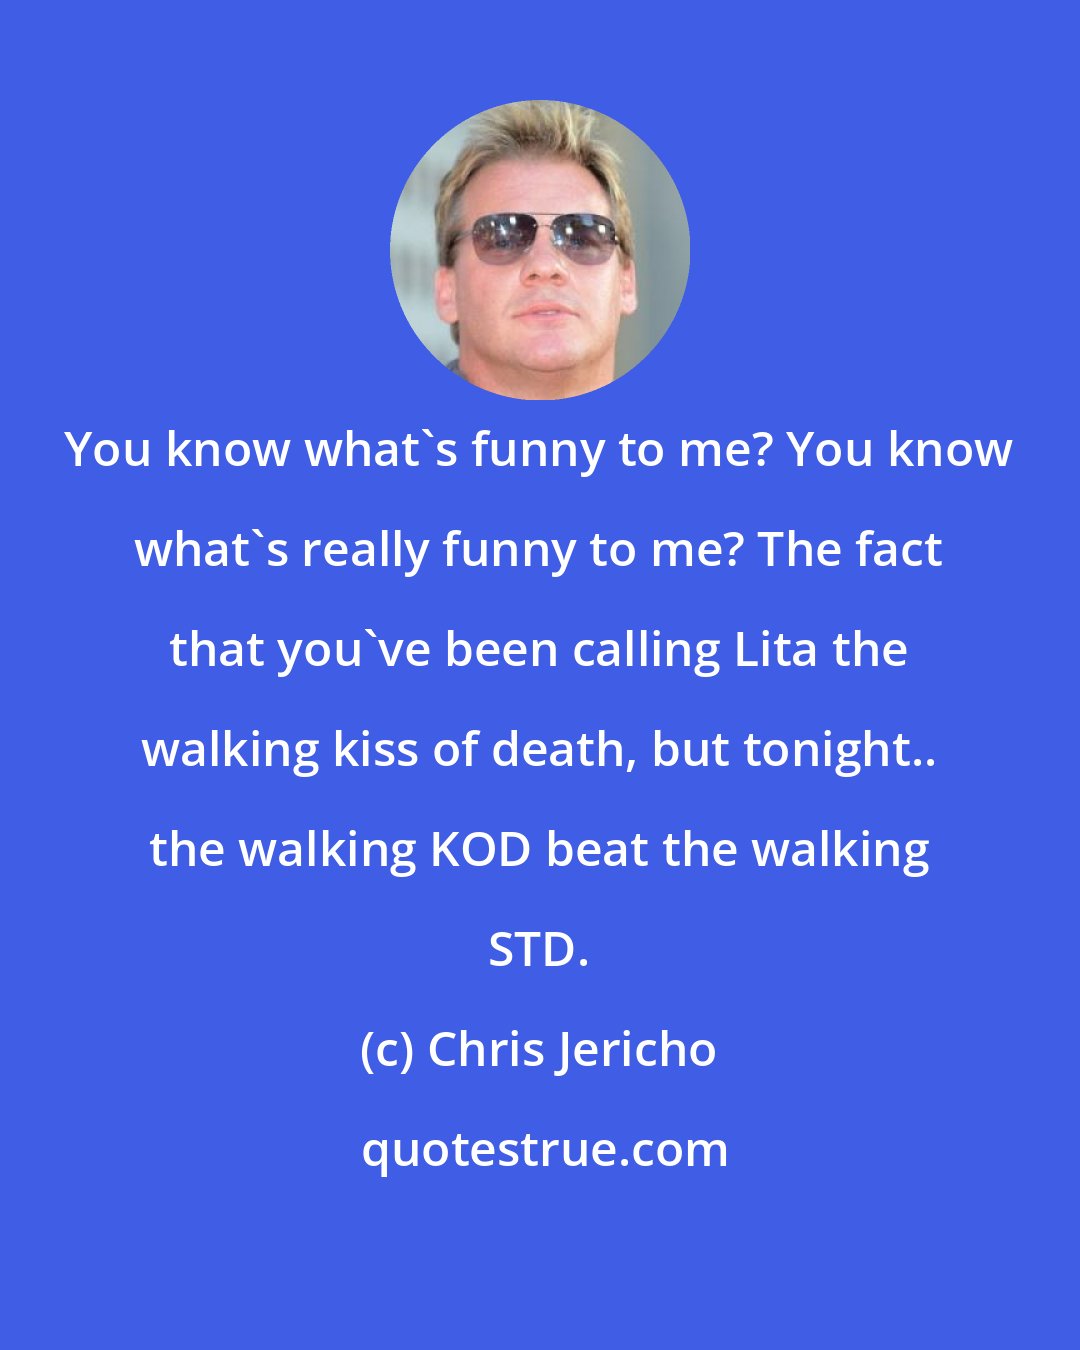 Chris Jericho: You know what's funny to me? You know what's really funny to me? The fact that you've been calling Lita the walking kiss of death, but tonight.. the walking KOD beat the walking STD.